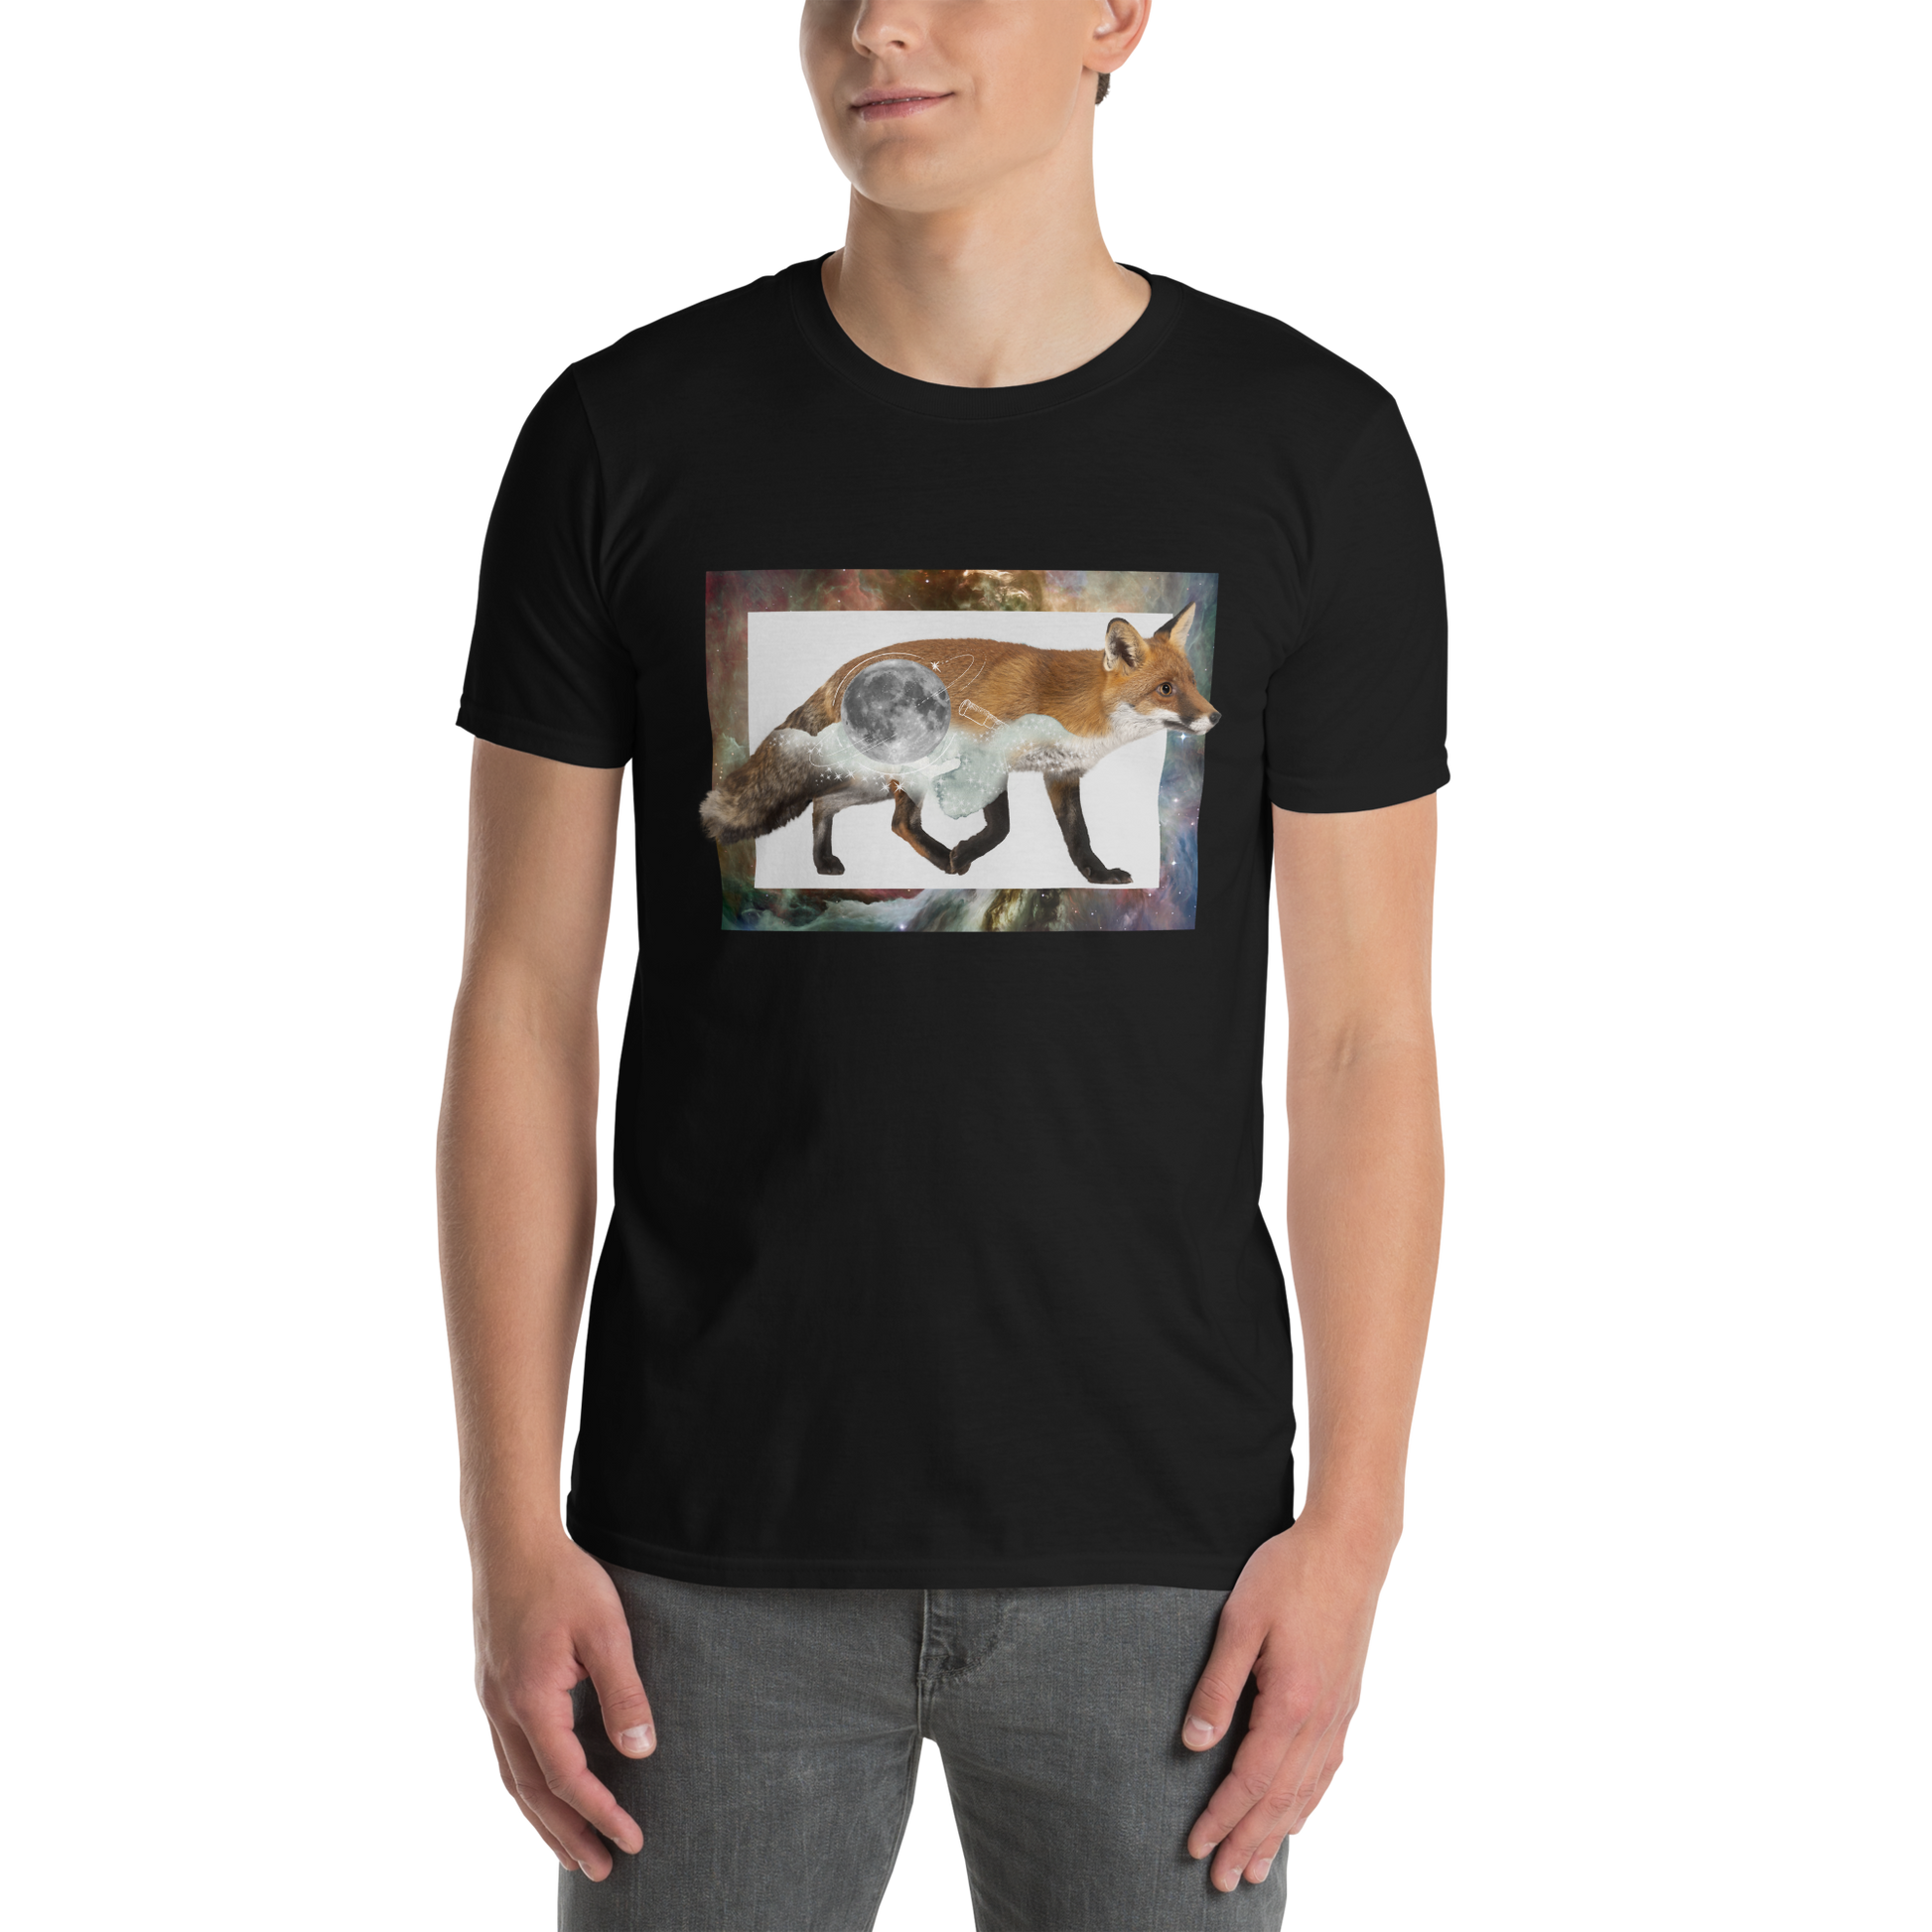 Man wearing a Black Fox T-Shirt featuring a captivating Space Fox graphic on the chest - Cool Graphic Fox T-Shirts - Boozy Fox